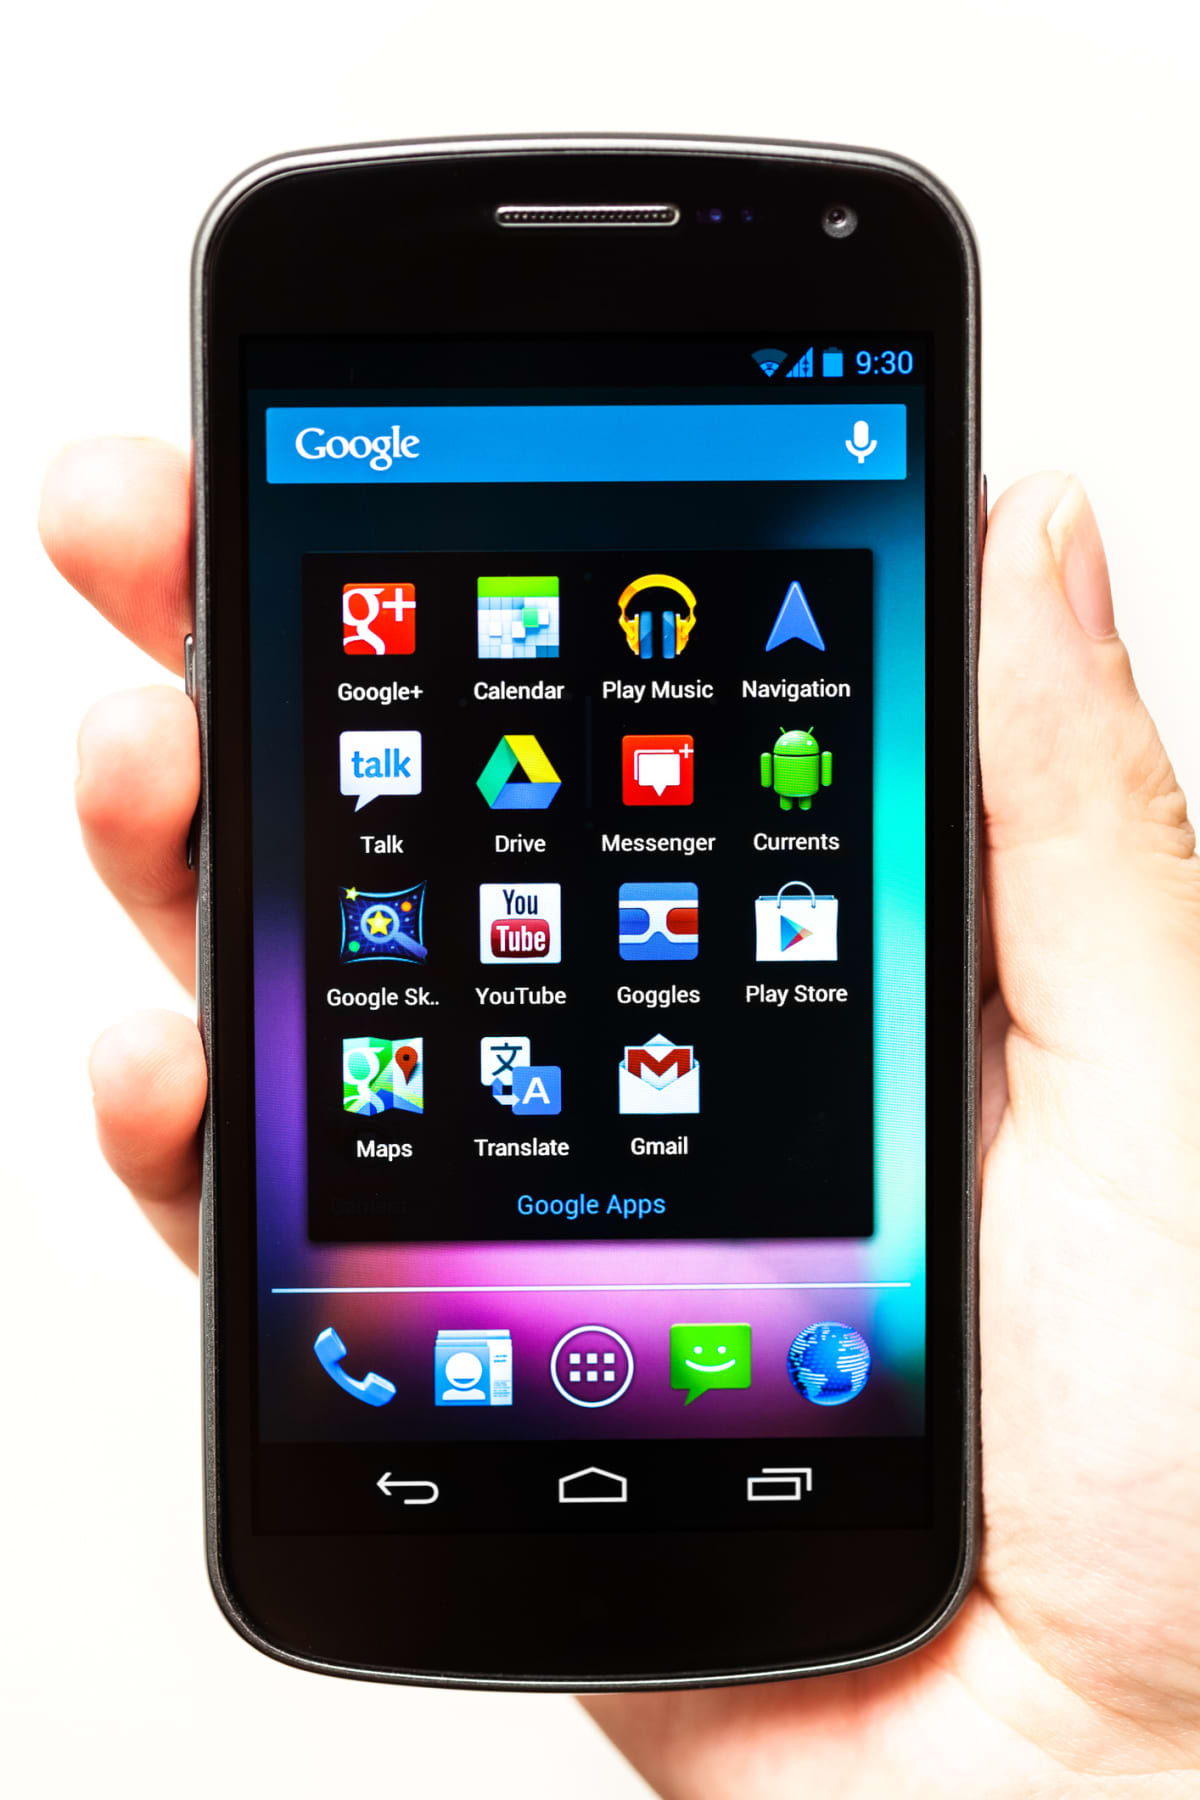 "Florence, Italy - August 19, 2012:  An hand holding the Galaxy Nexus smartphone on white background showing the homescreen with the Google applications. Made by Google and Samsung it mounts the operating system Android 4.1 (called Jelly Bean)."